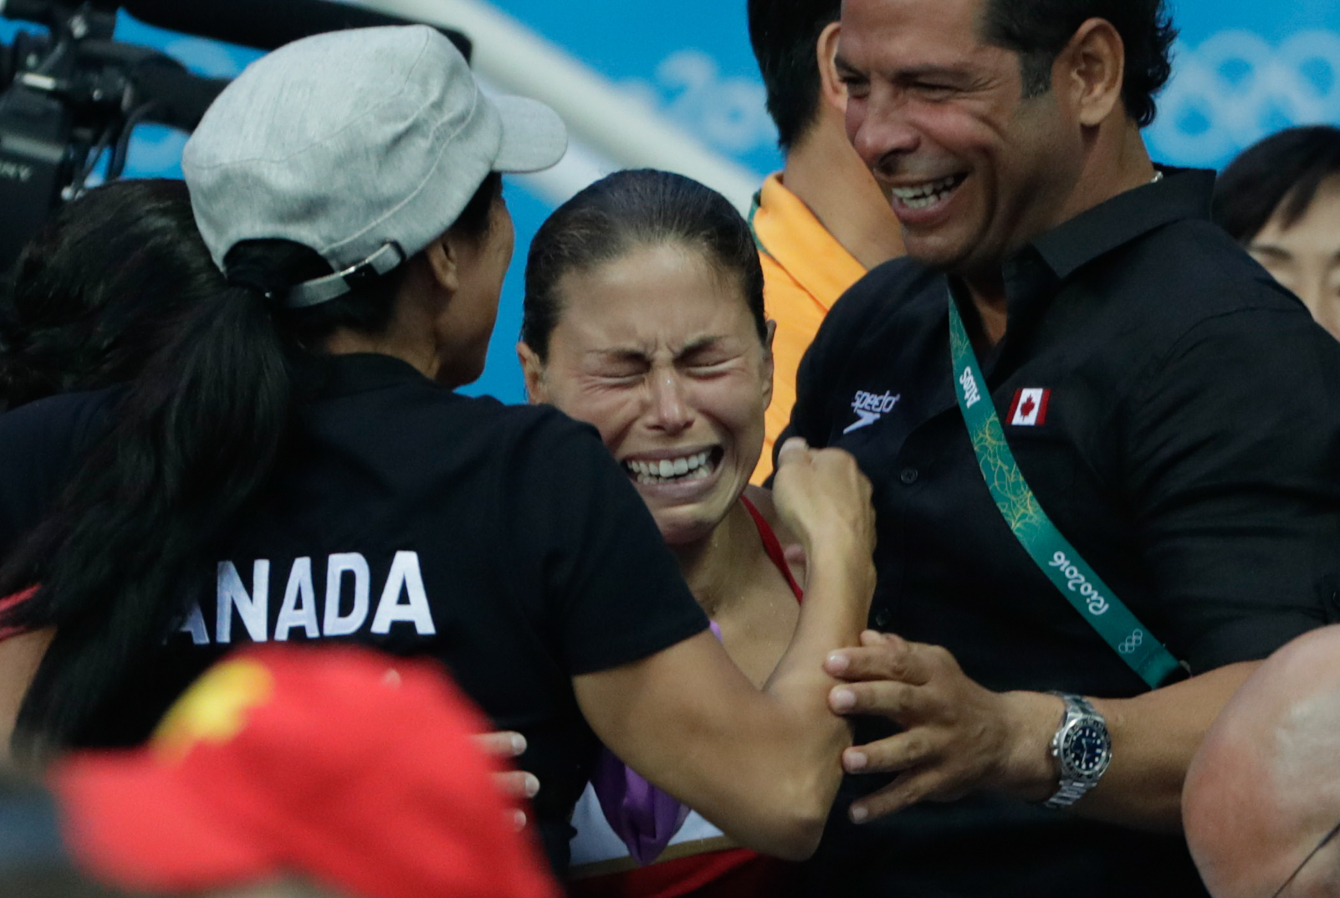 Canada's Roseline Filion reacts to the results which gave her and partner Meaghan Benfeito the bronze medal in the women's synchronized 10-meter platform diving final at the 2016 Summer Olympics in Rio de Janeiro, Brazil, Tuesday, Aug. 9, 2016 (photo/Jason Ransom)